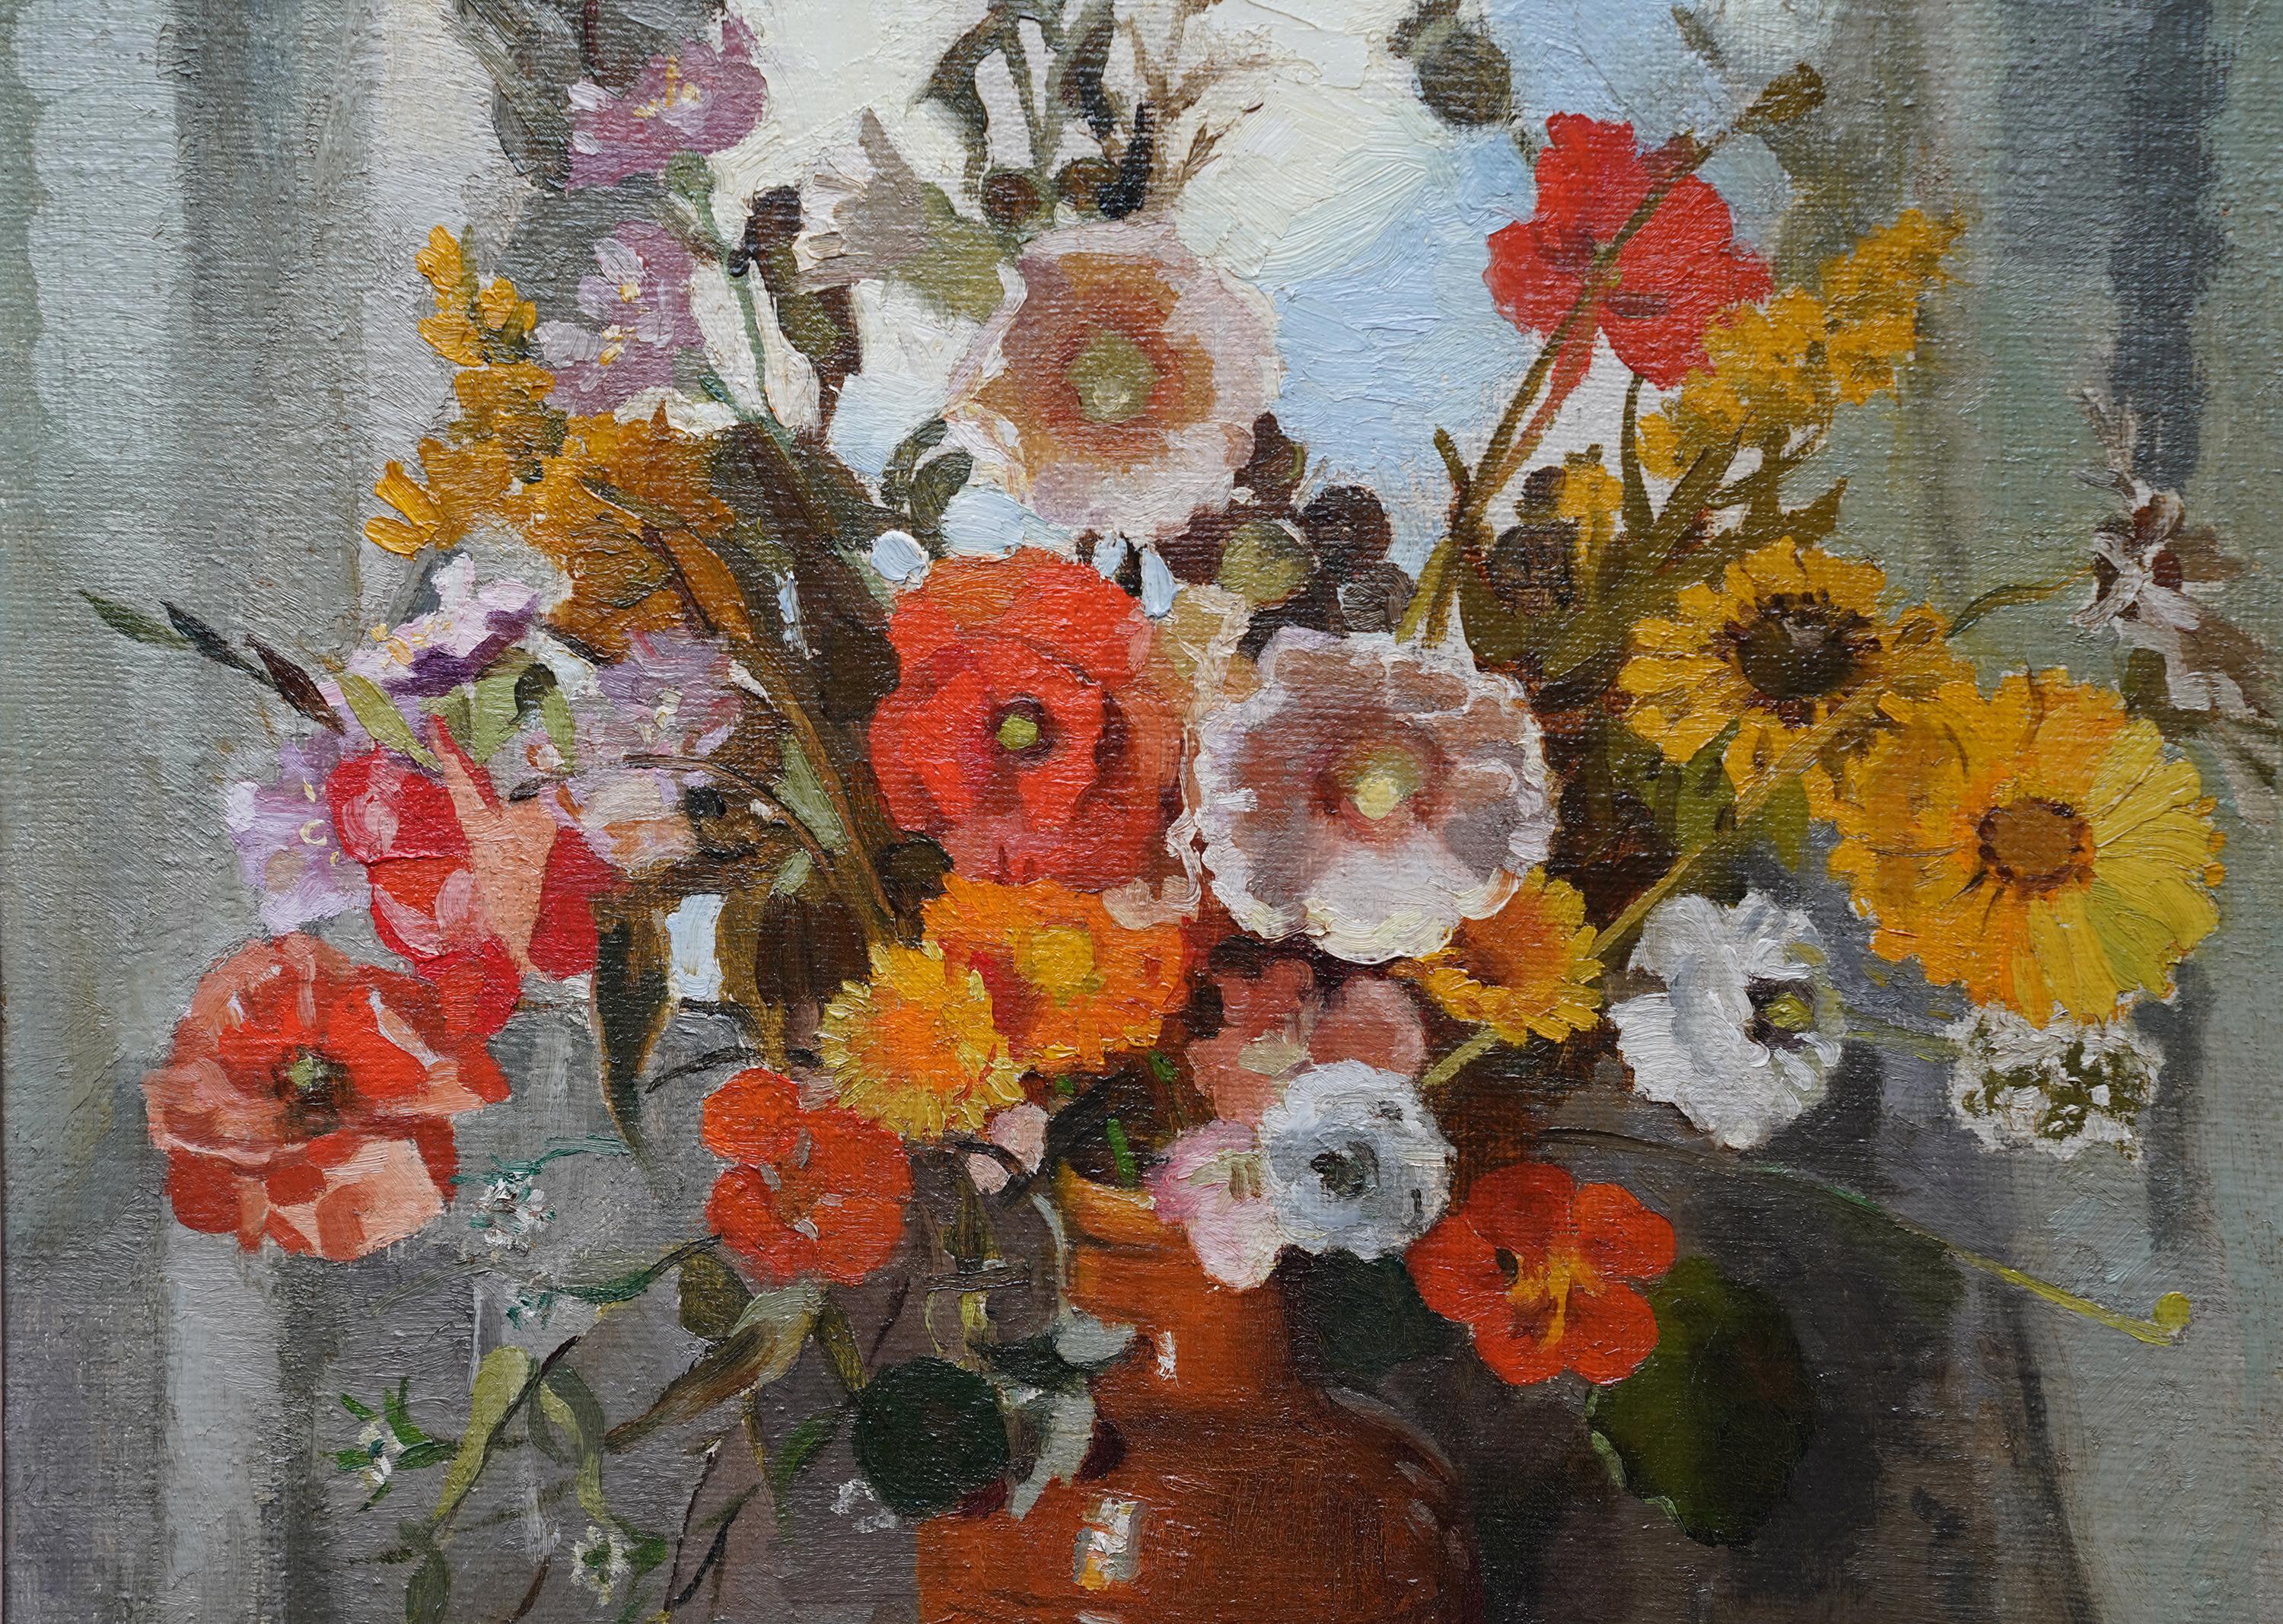 Still Life Summer Floral Arrangement - British Slade School flower oil painting - Post-Impressionist Painting by Theresa Norah Copnall